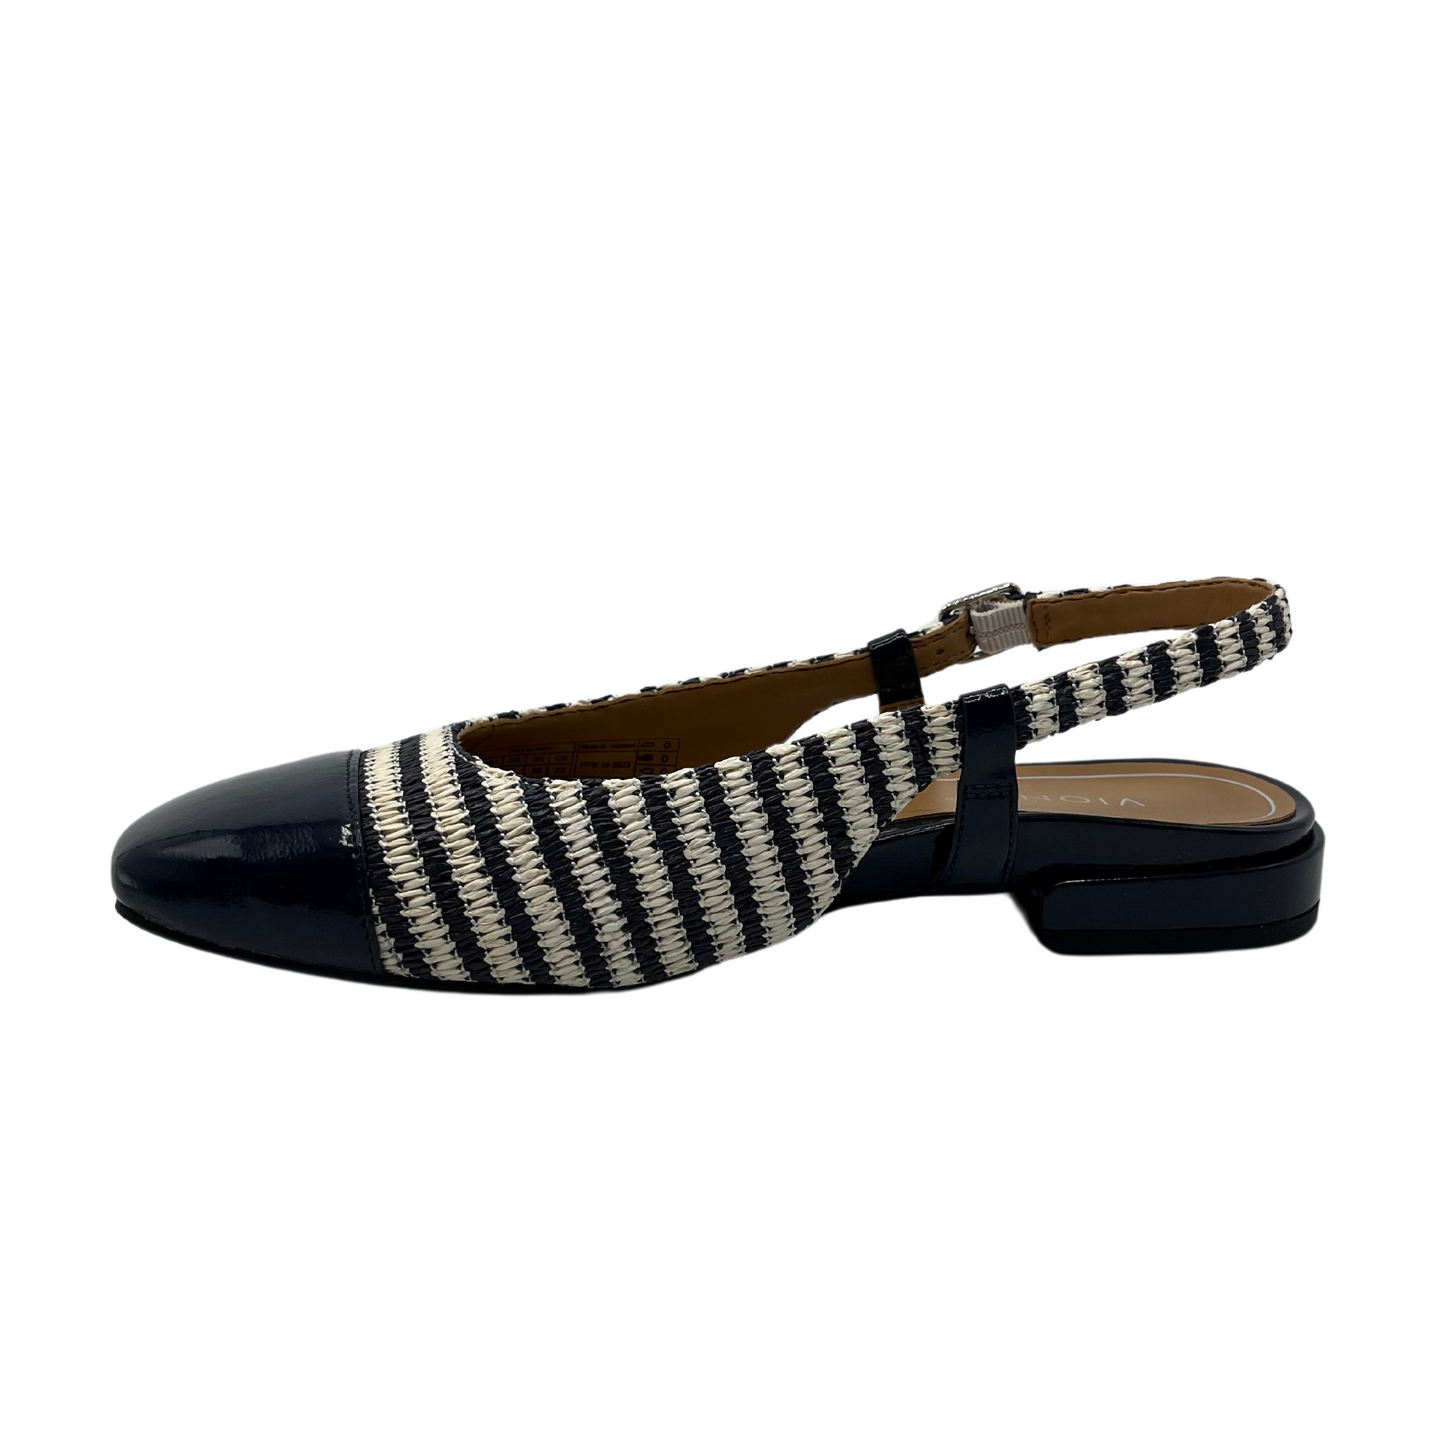 Left facing view of black and white striped slingback shoe with short heel and square toe